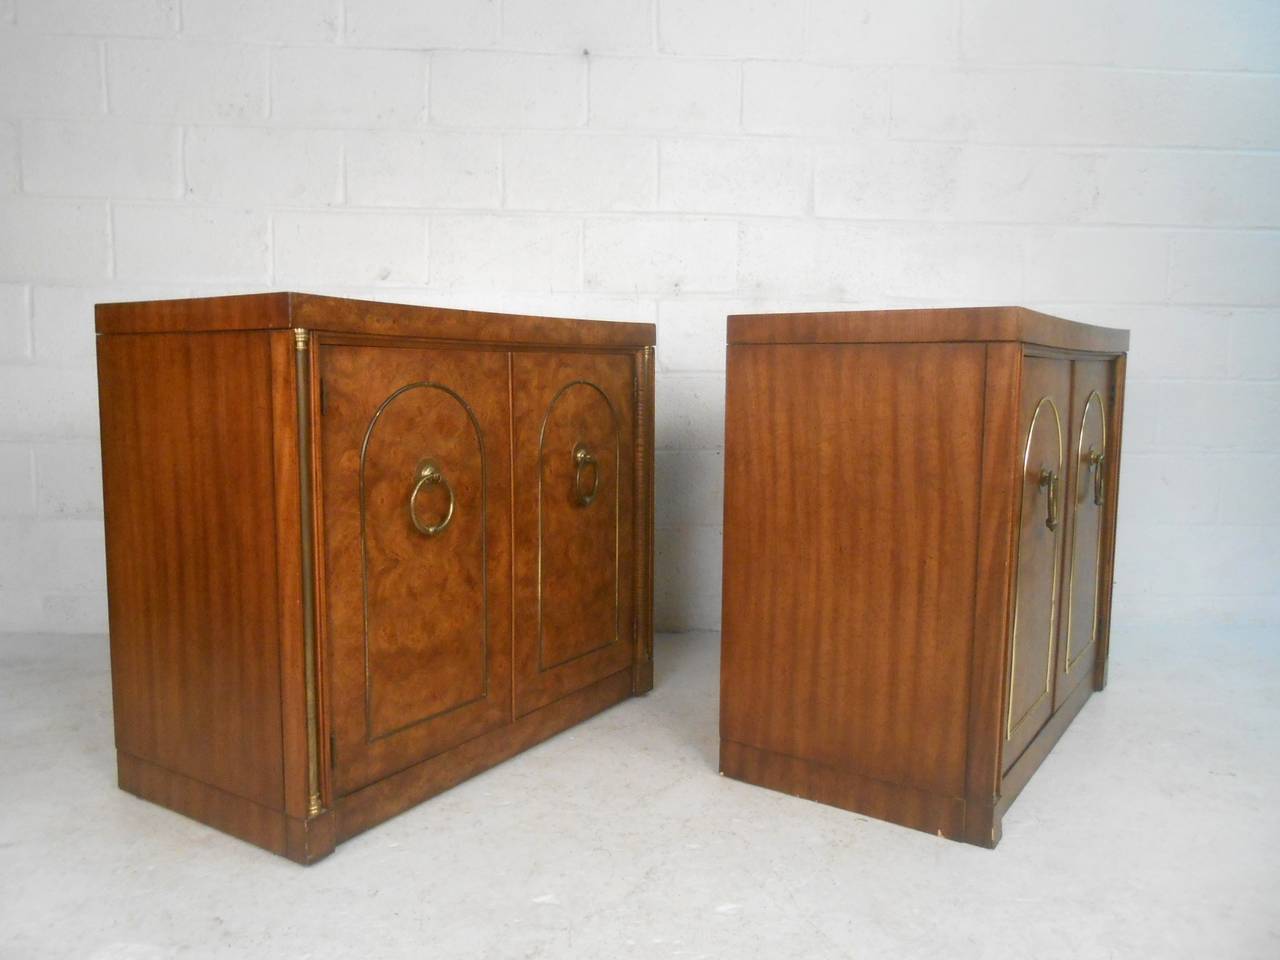 20th Century Pair of Mid-Century Modern Style Burlwood and Brass Dressers by Weiman